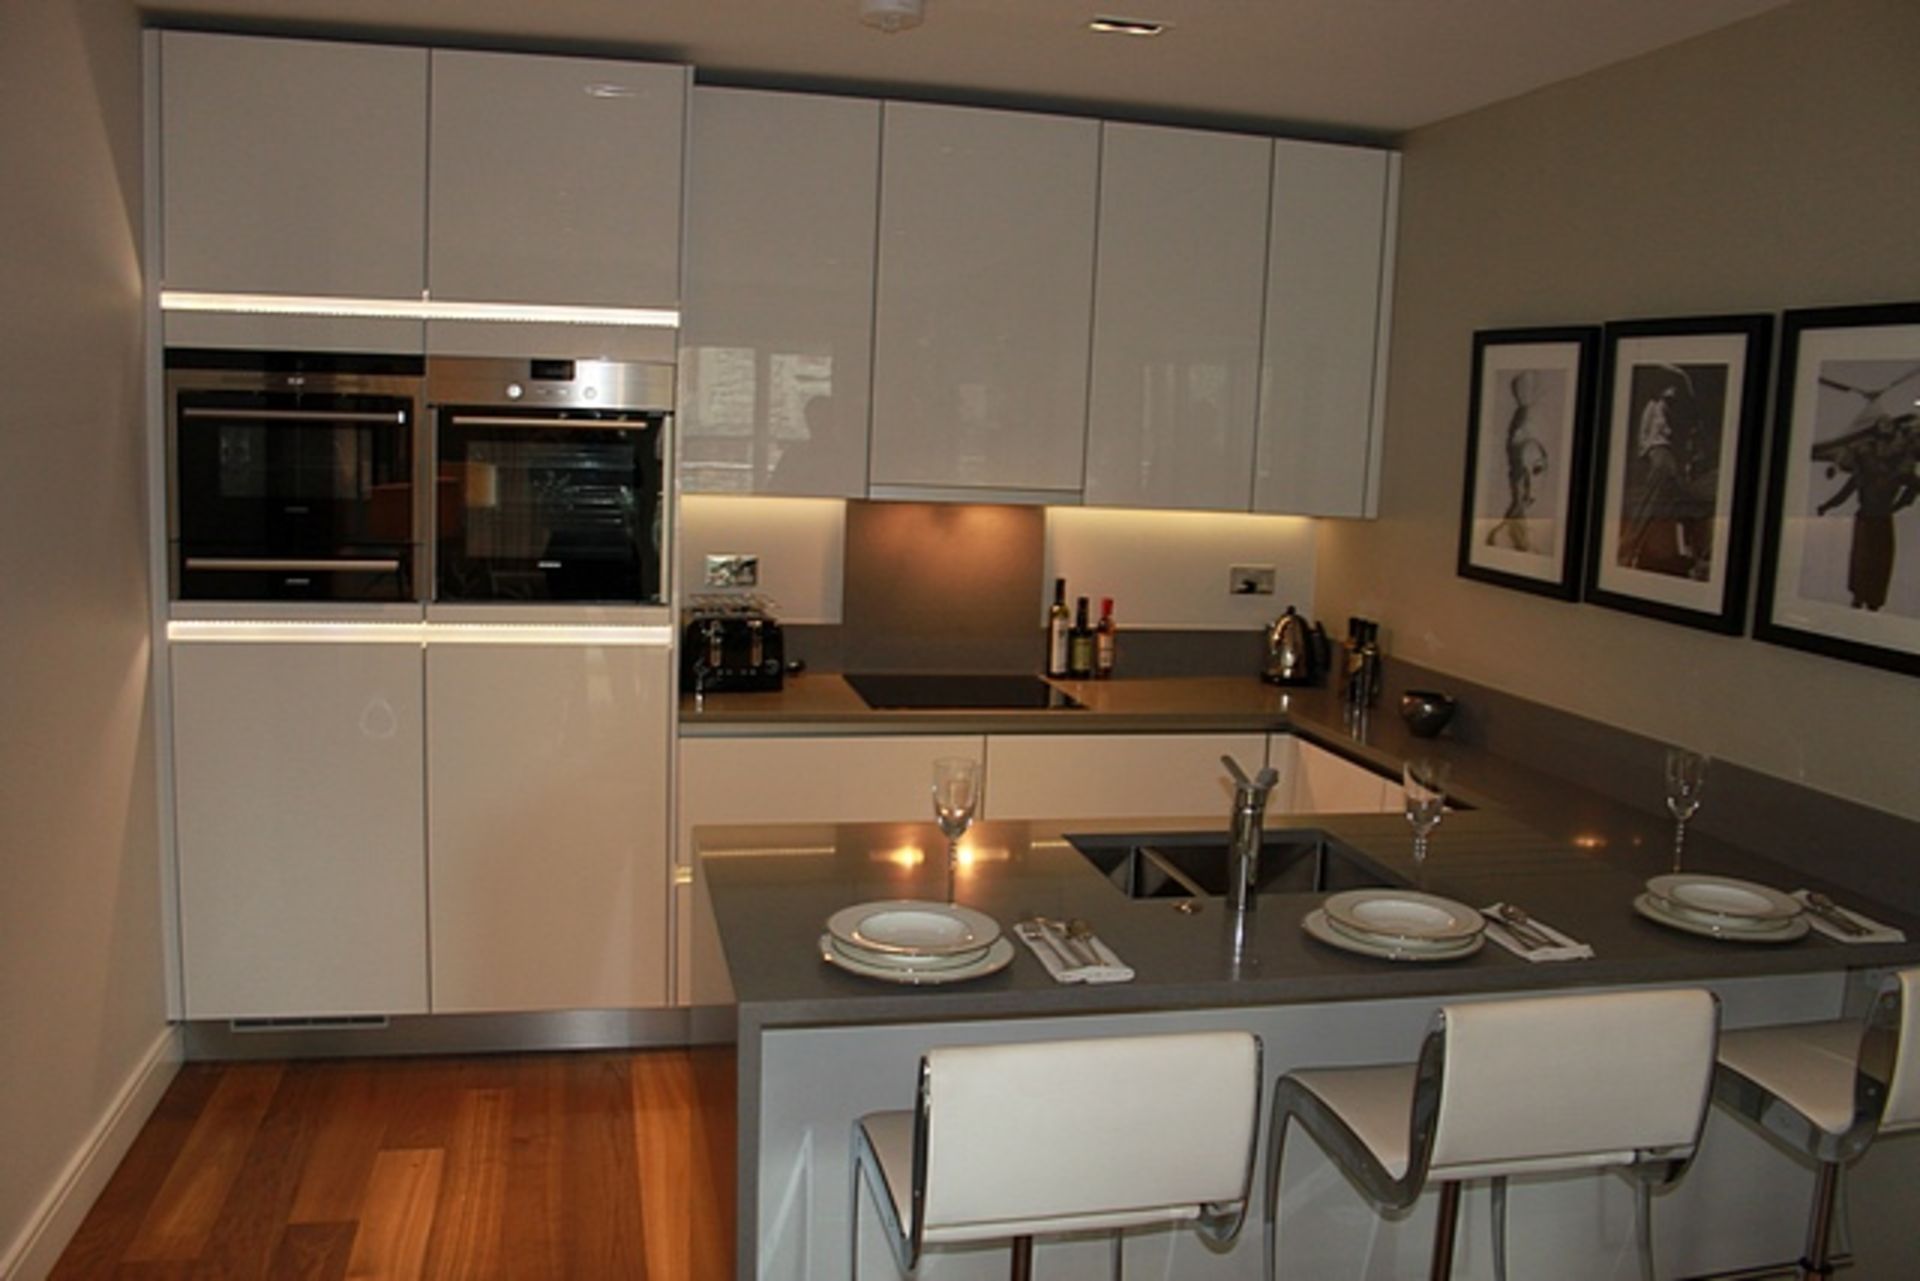 Complete L shaped kitchen with base and wall cabinets complete with Siemens integral appliances of